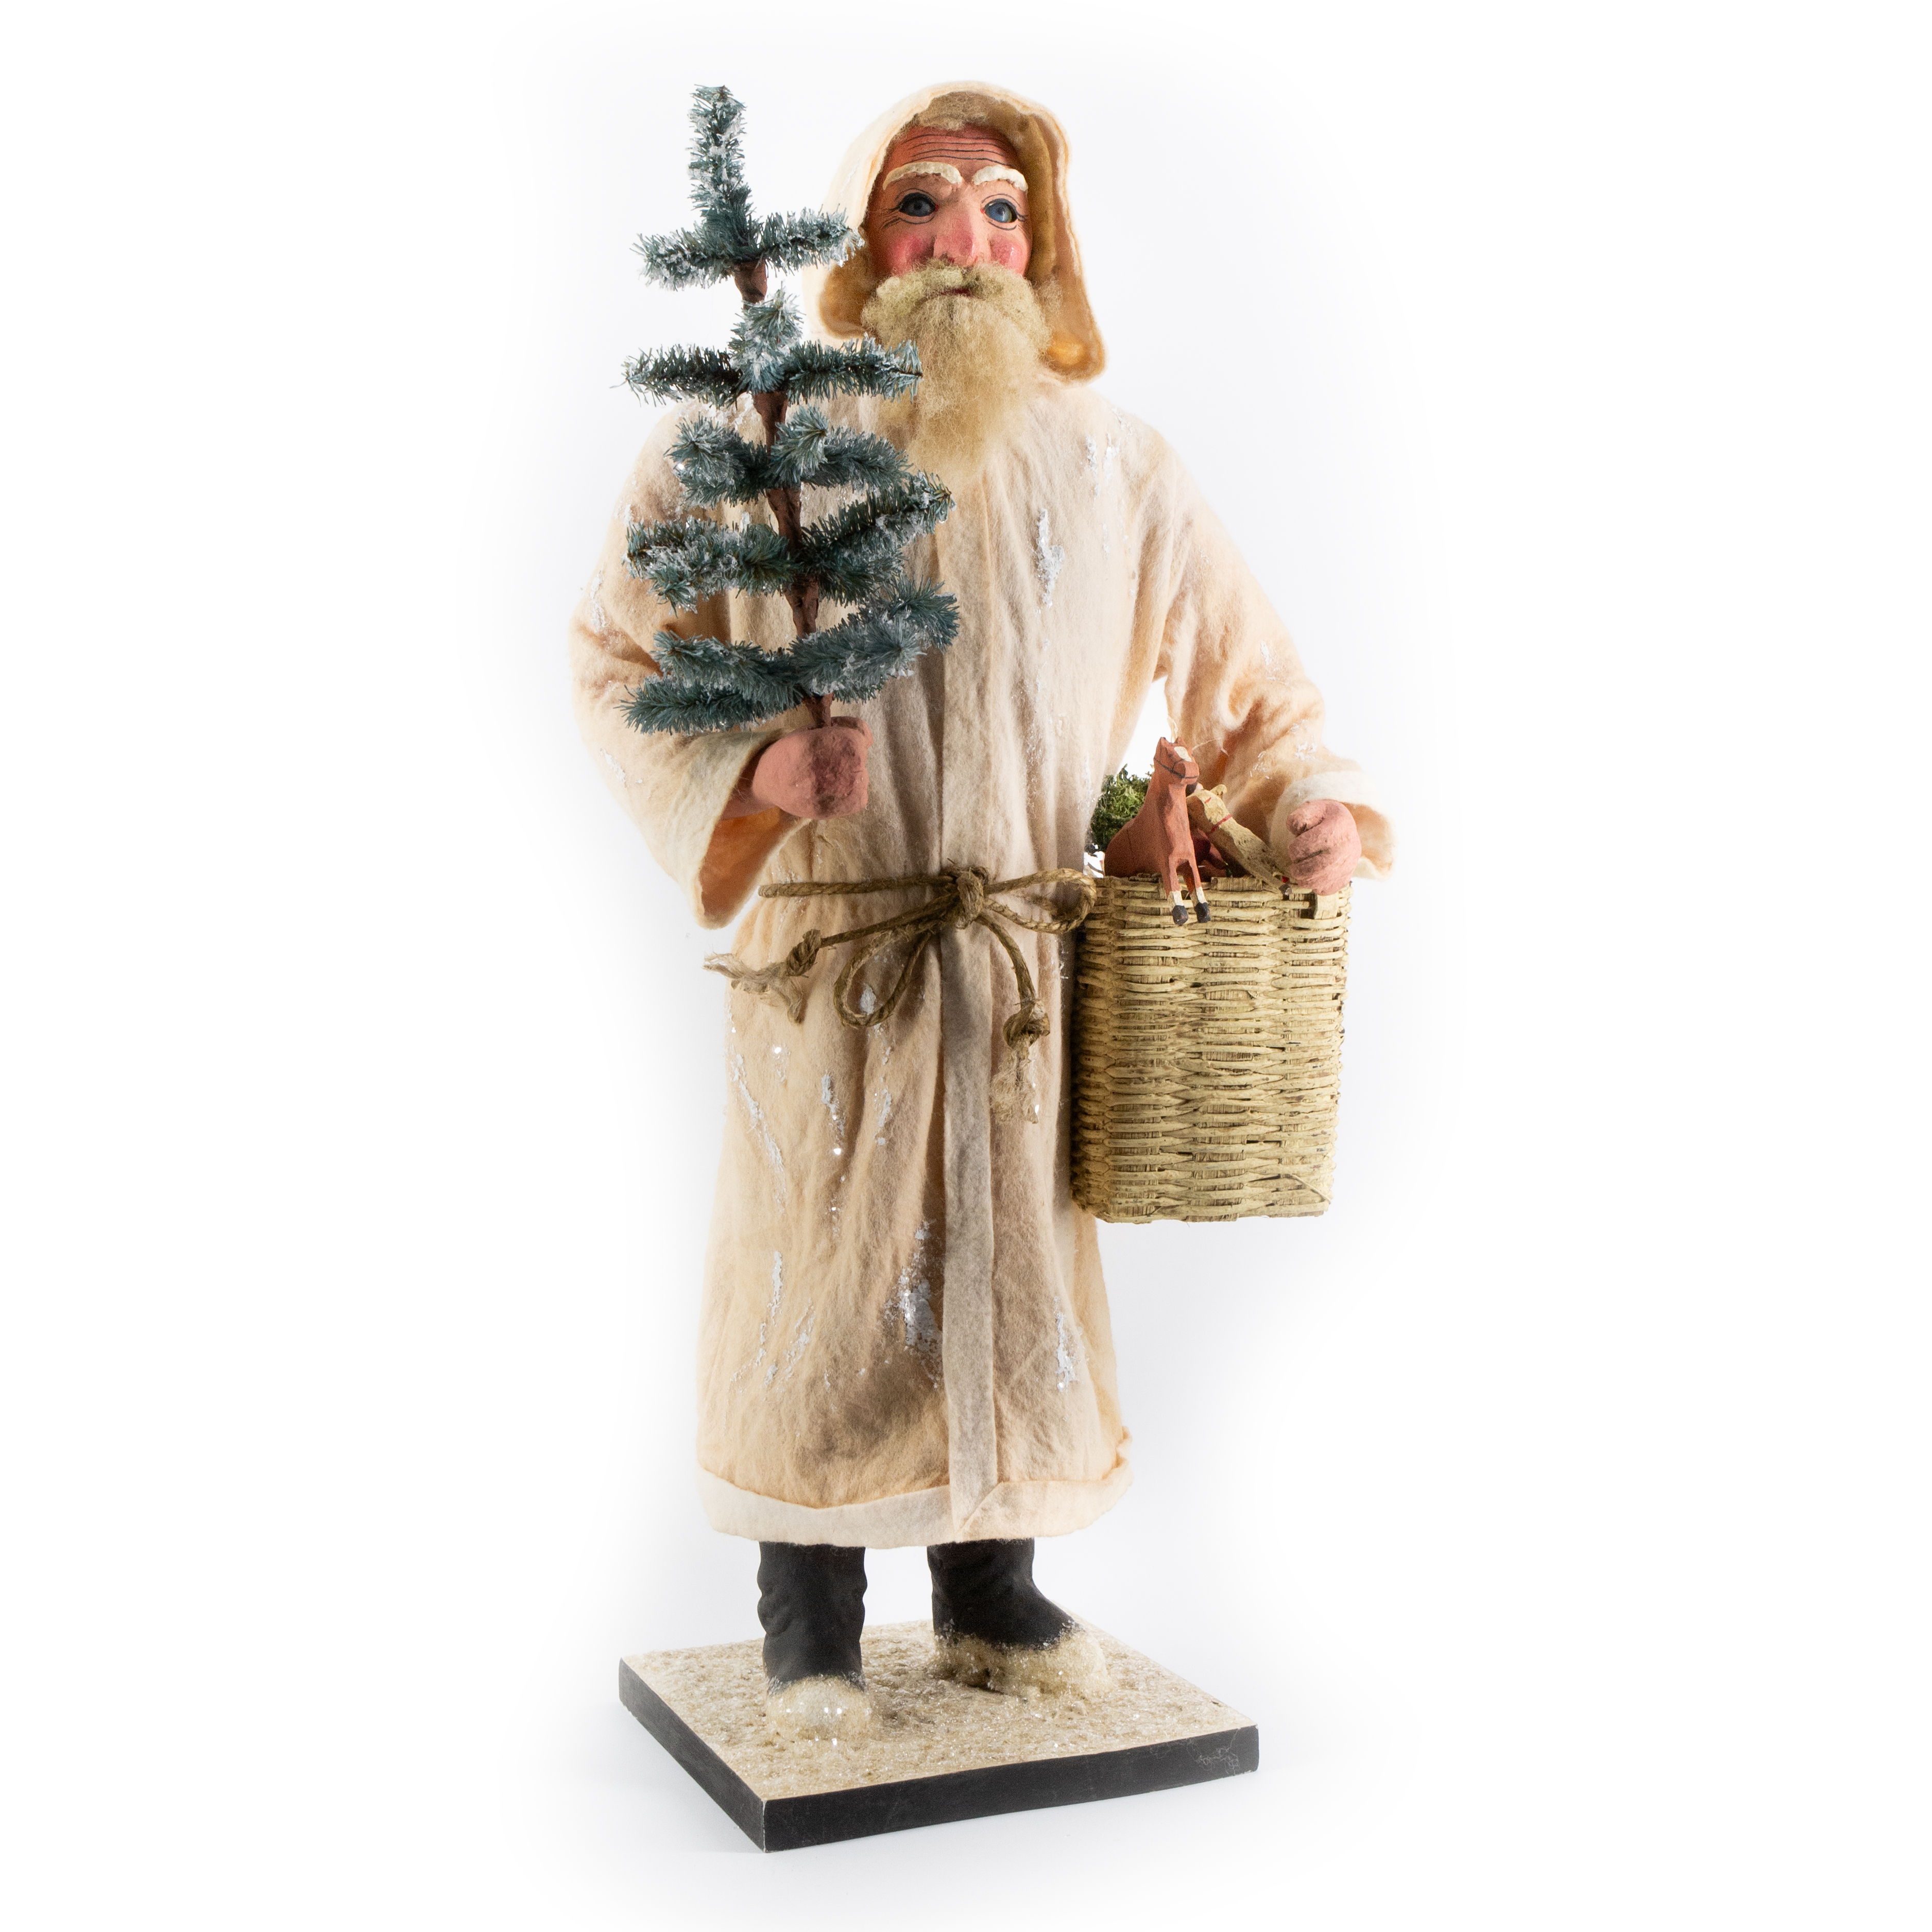 Candy Container Santa Claus with creamy felt coat, basket and toys, H=60cm 